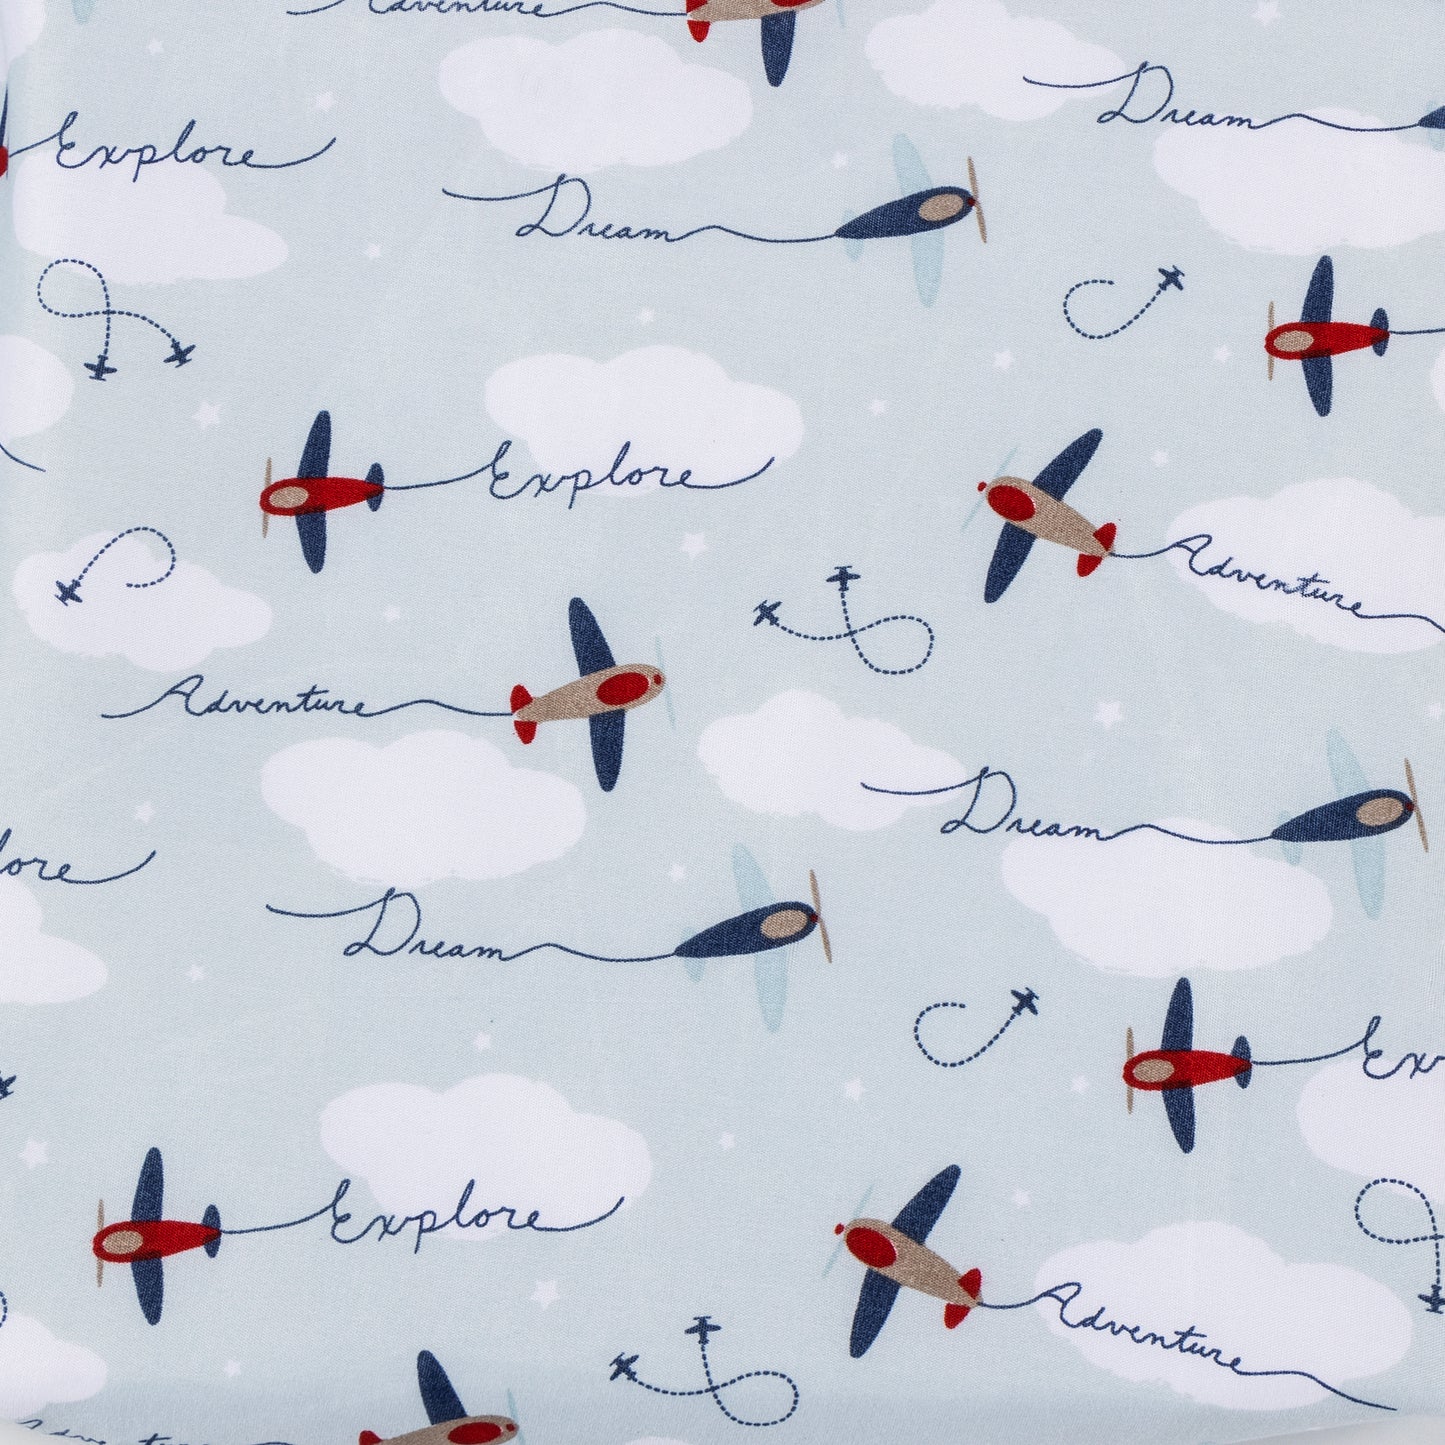 Air Travel 3 Piece Crib Bedding Set by Sammy & Lou® - swatch view of crib sheet with blue background, red and navy airplane scatter print and clouds